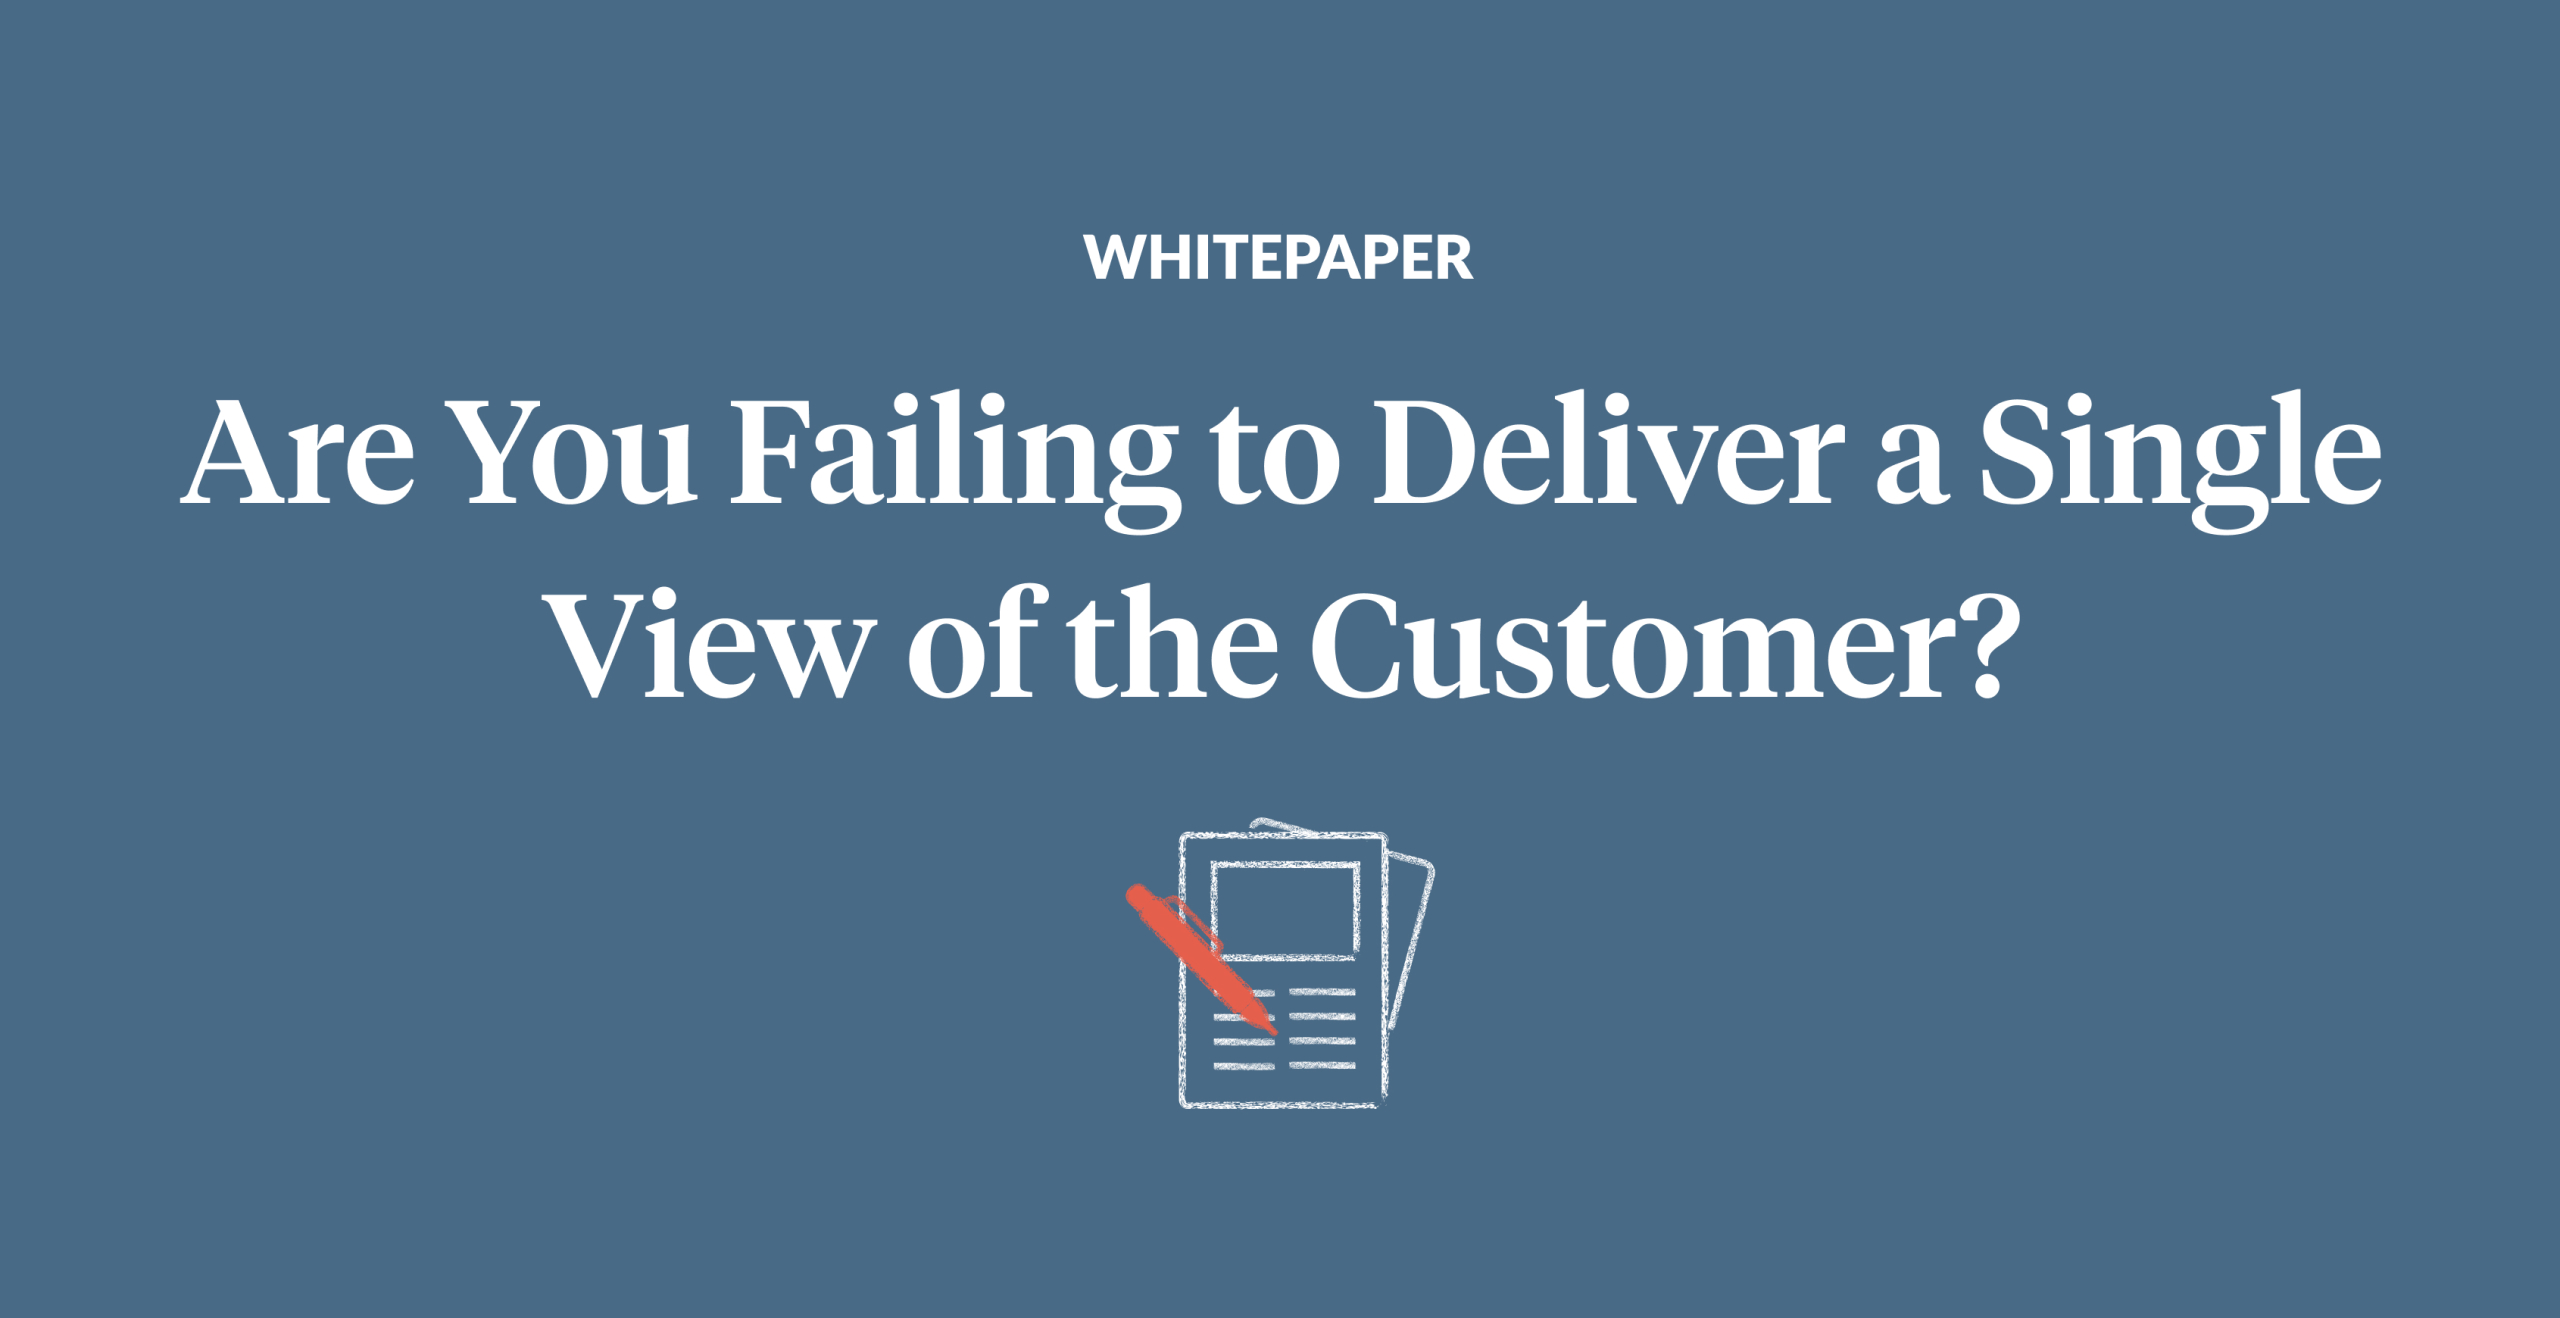 Are You Failing to Deliver a Single View of the Customer?